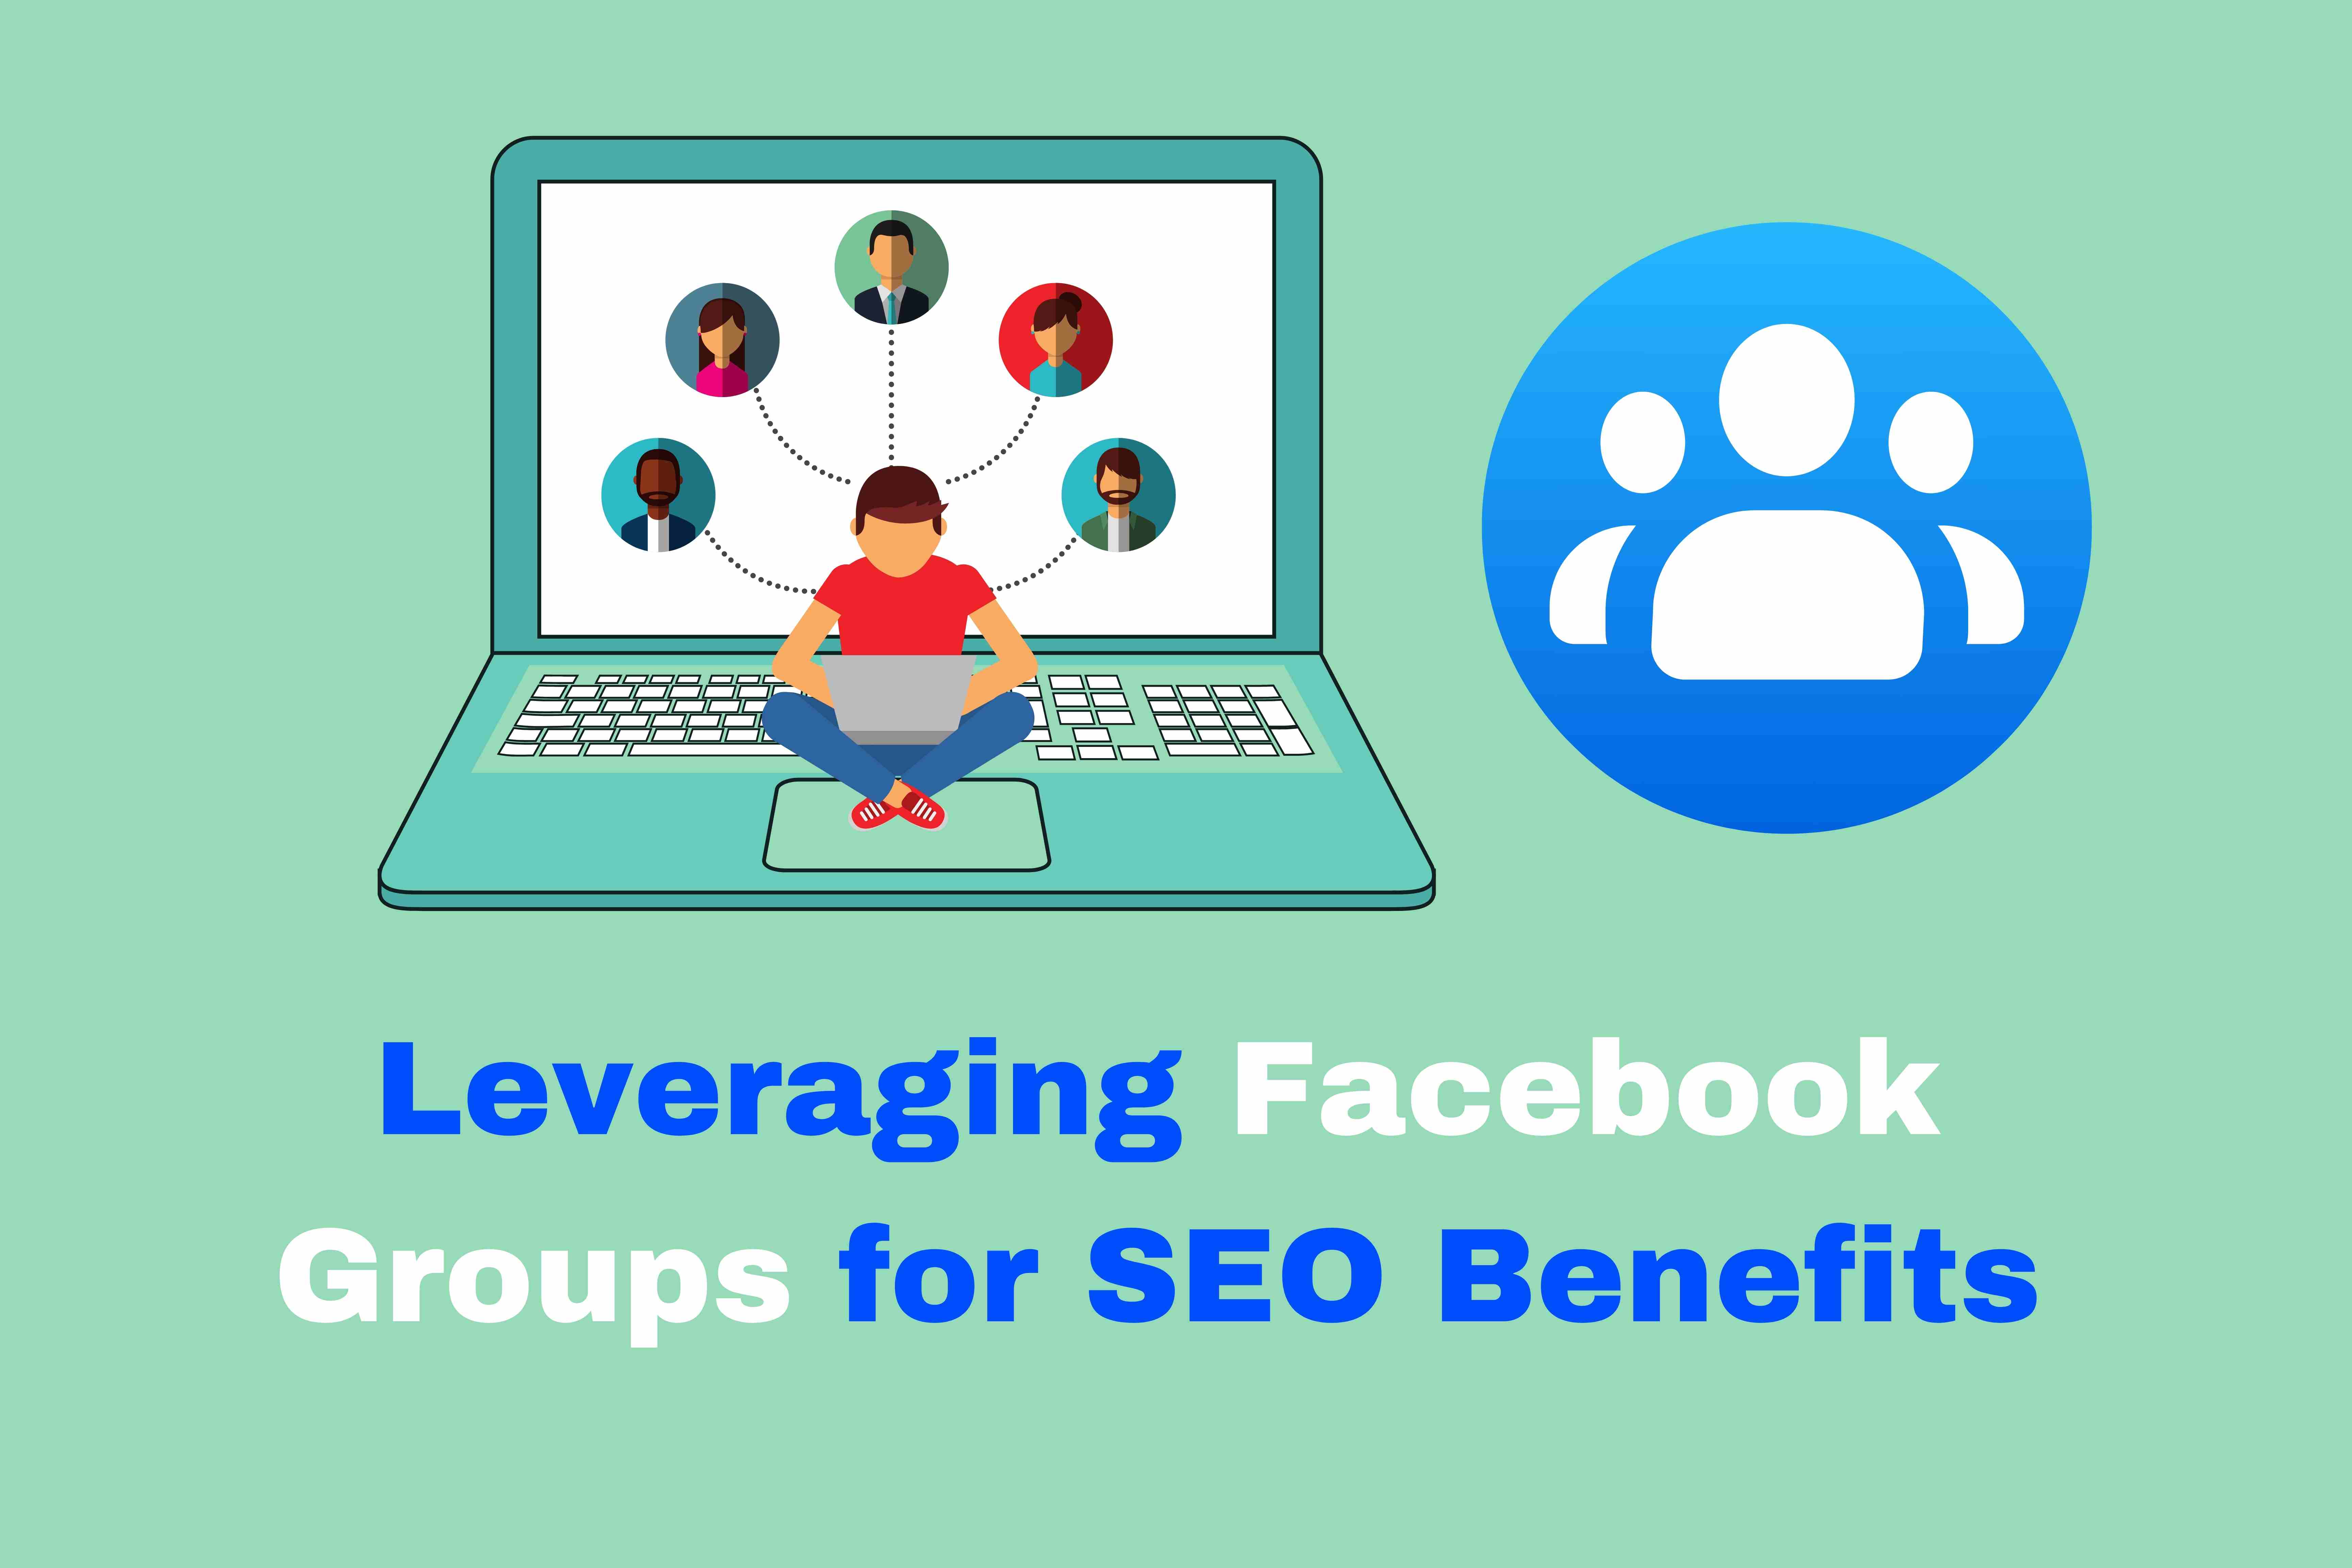 Leveraging Facebook Groups for SEO Benefits